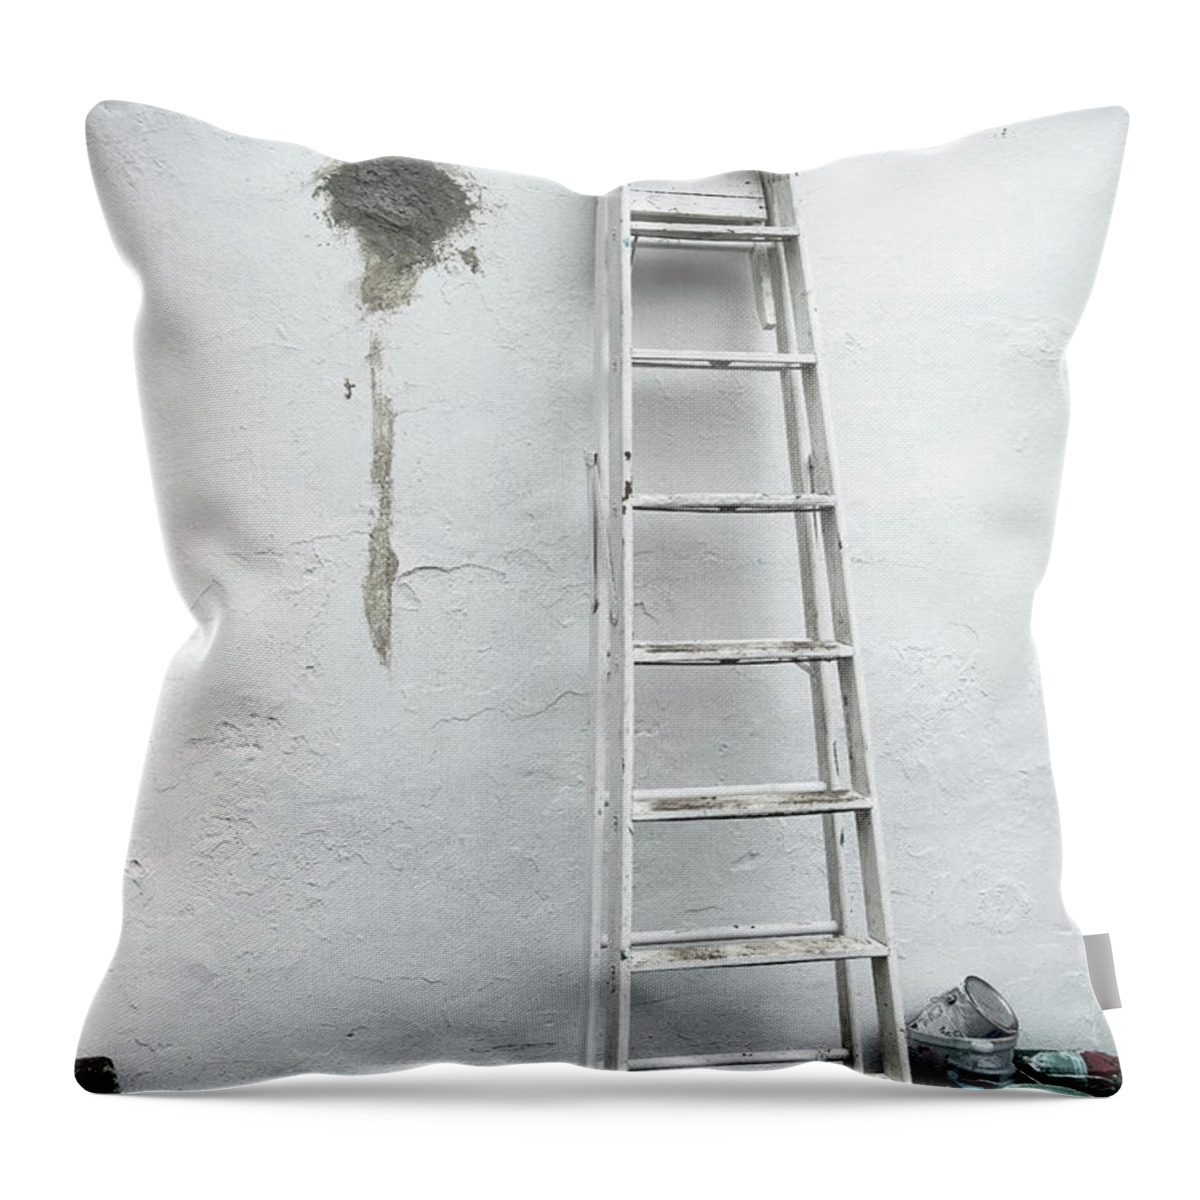 He Brattleboro Retreat Meadows Throw Pillow featuring the photograph White Ladder by Tom Singleton